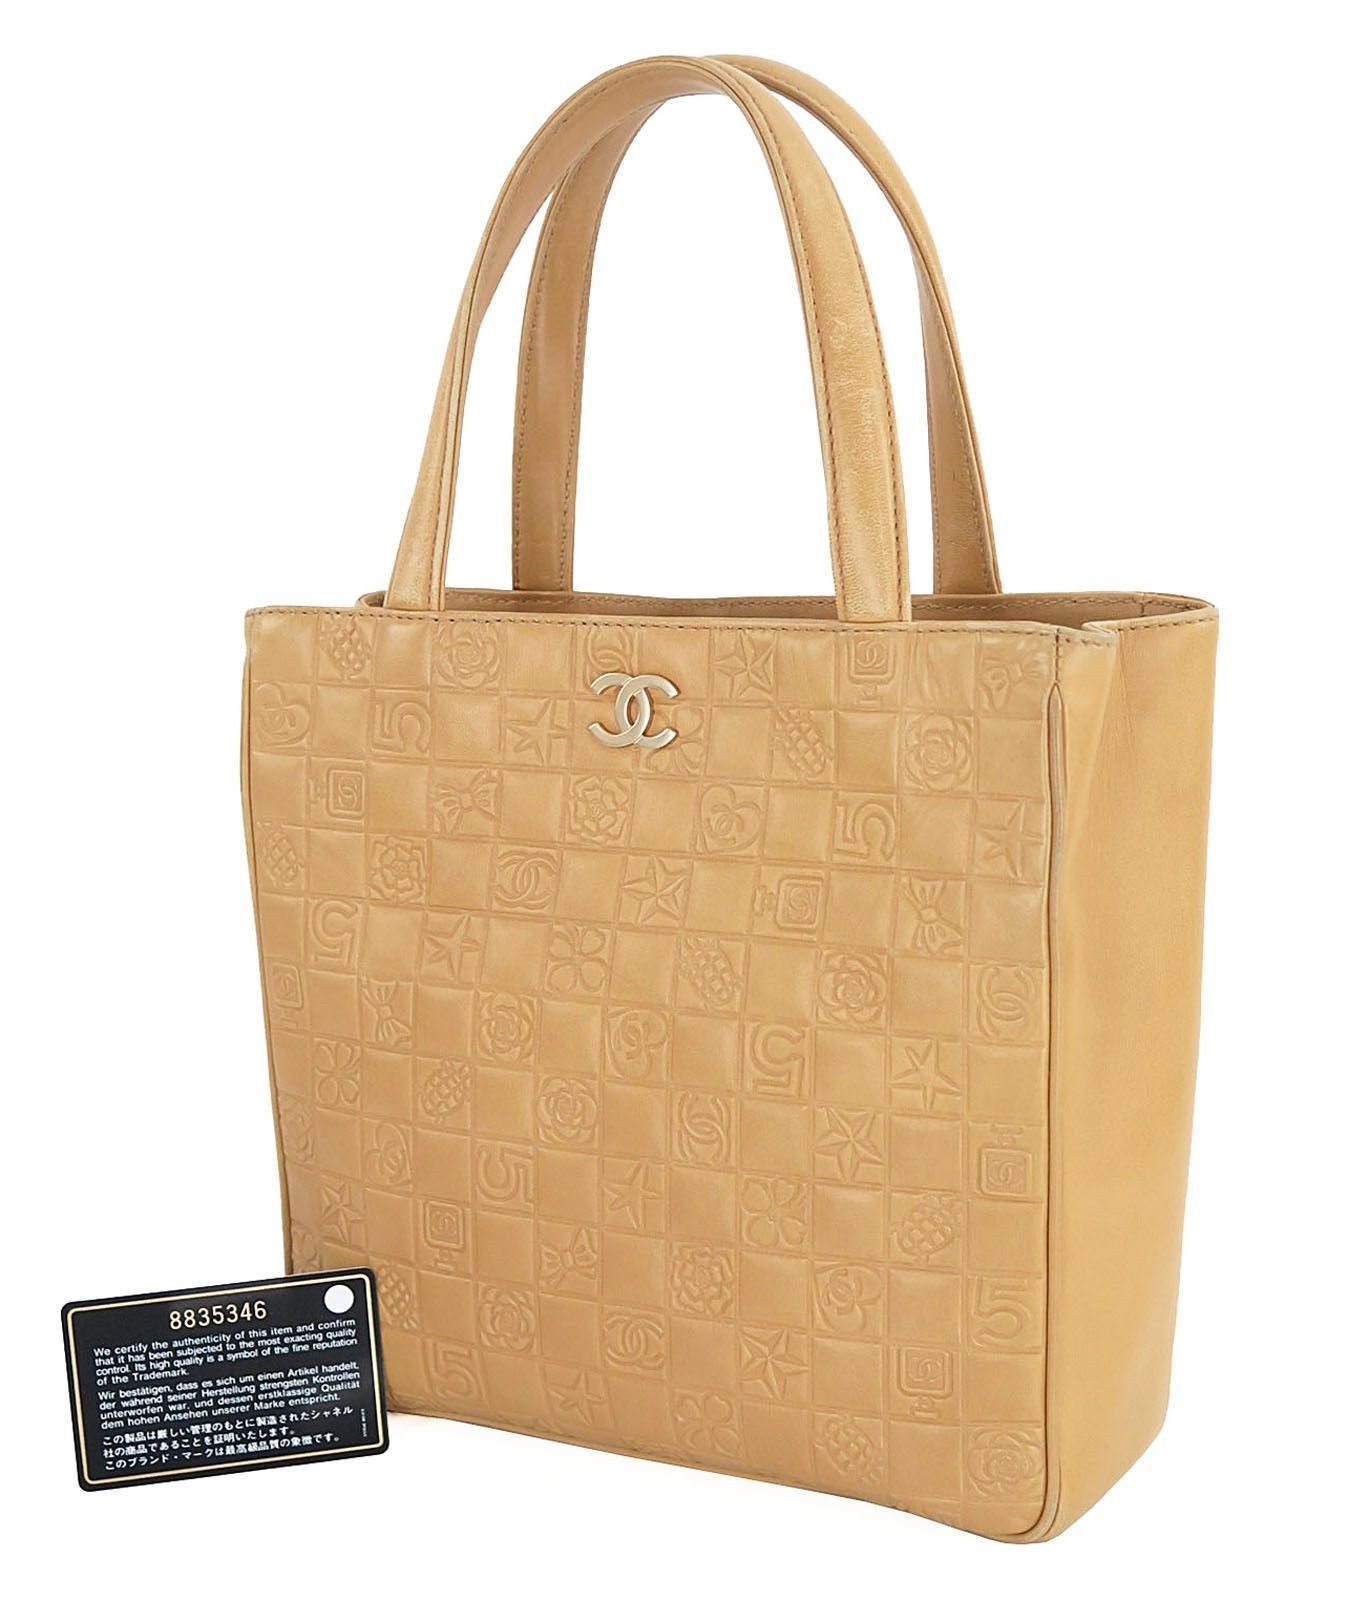 Auth CHANEL Beige Chocolate Bar Leather CC Design Tote Bag Purse #26422 - $479.00